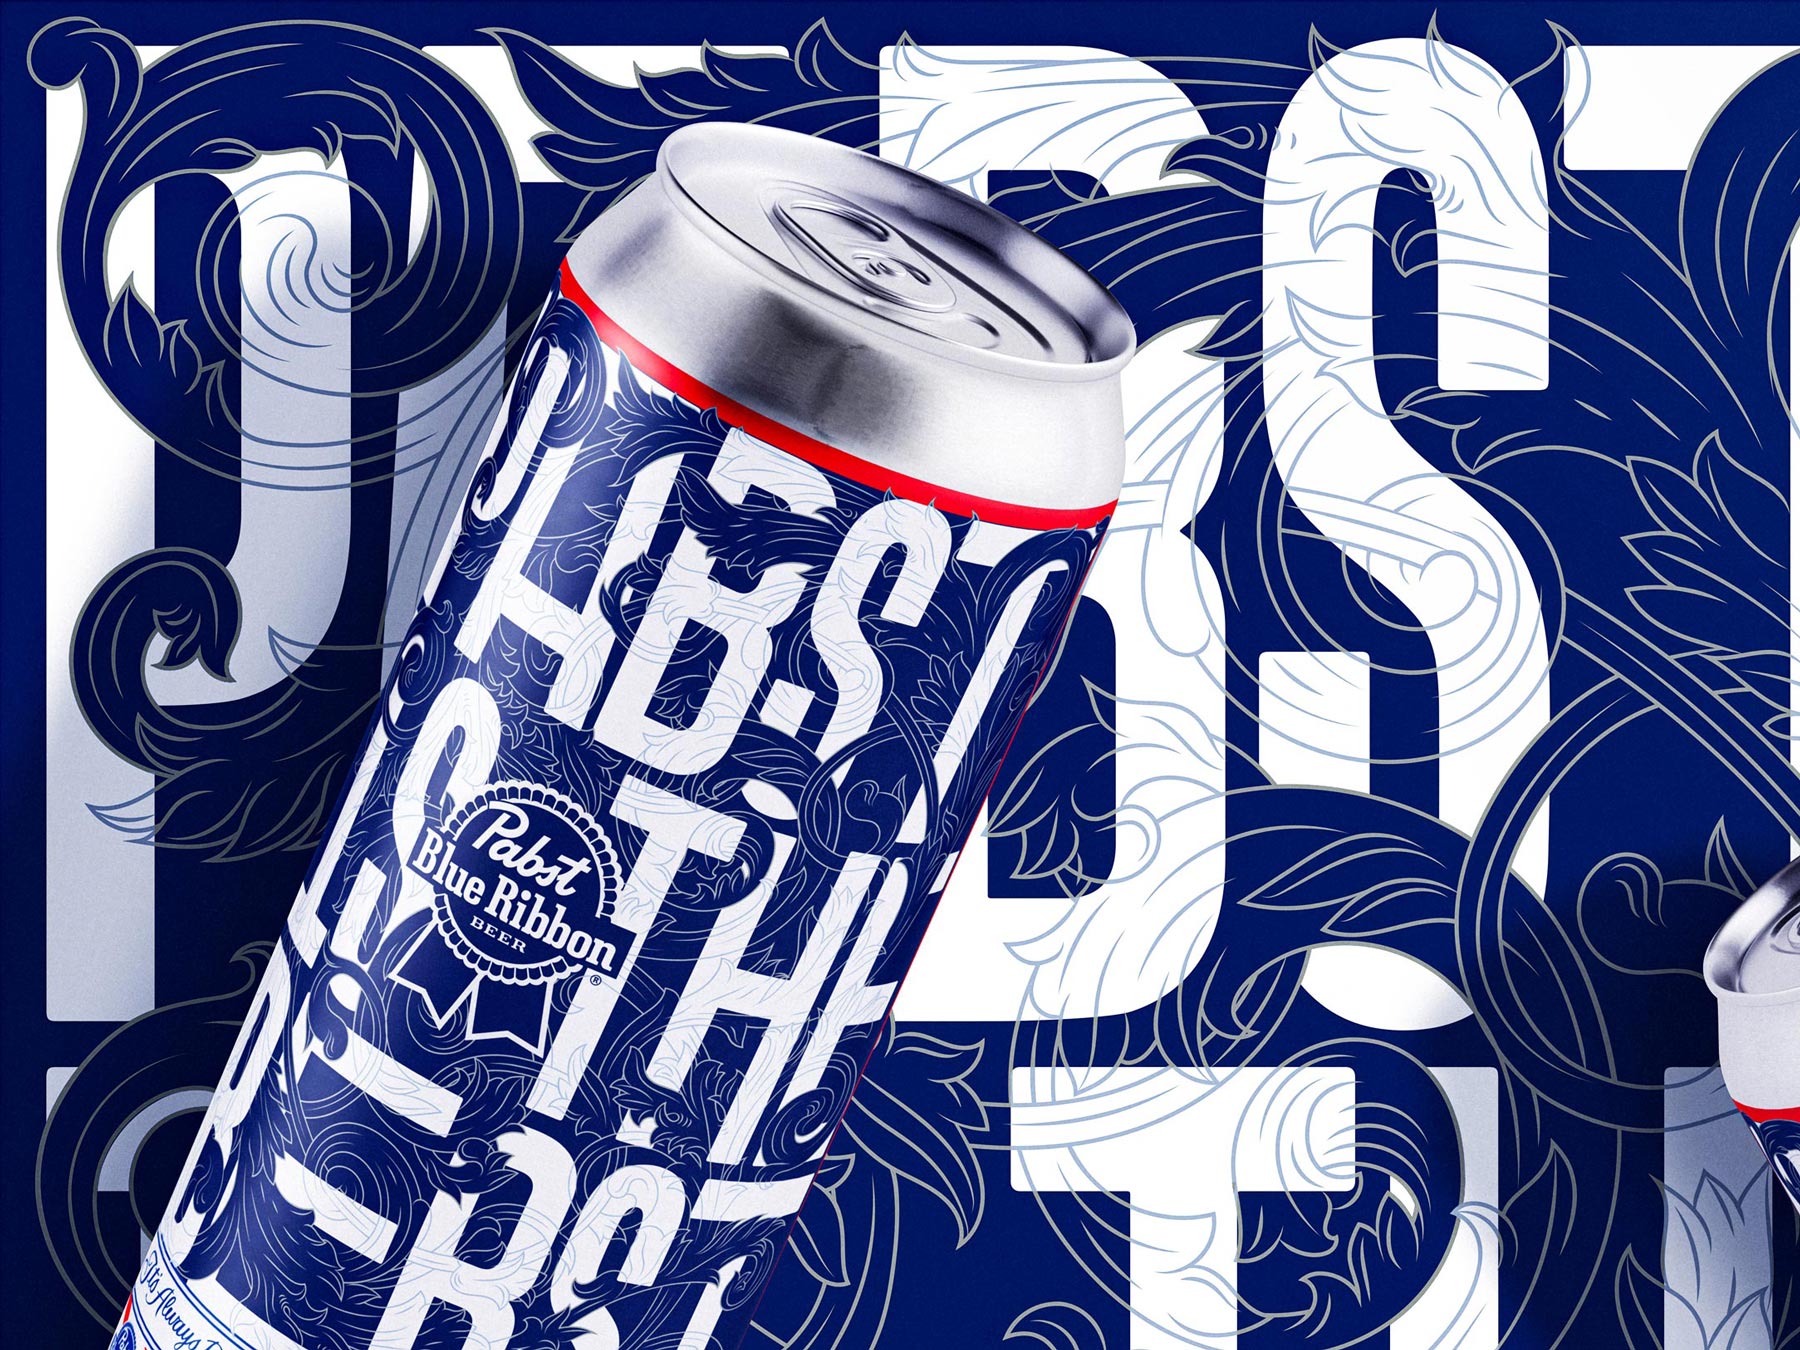 Pabst Blue Ribbon’s can art contest